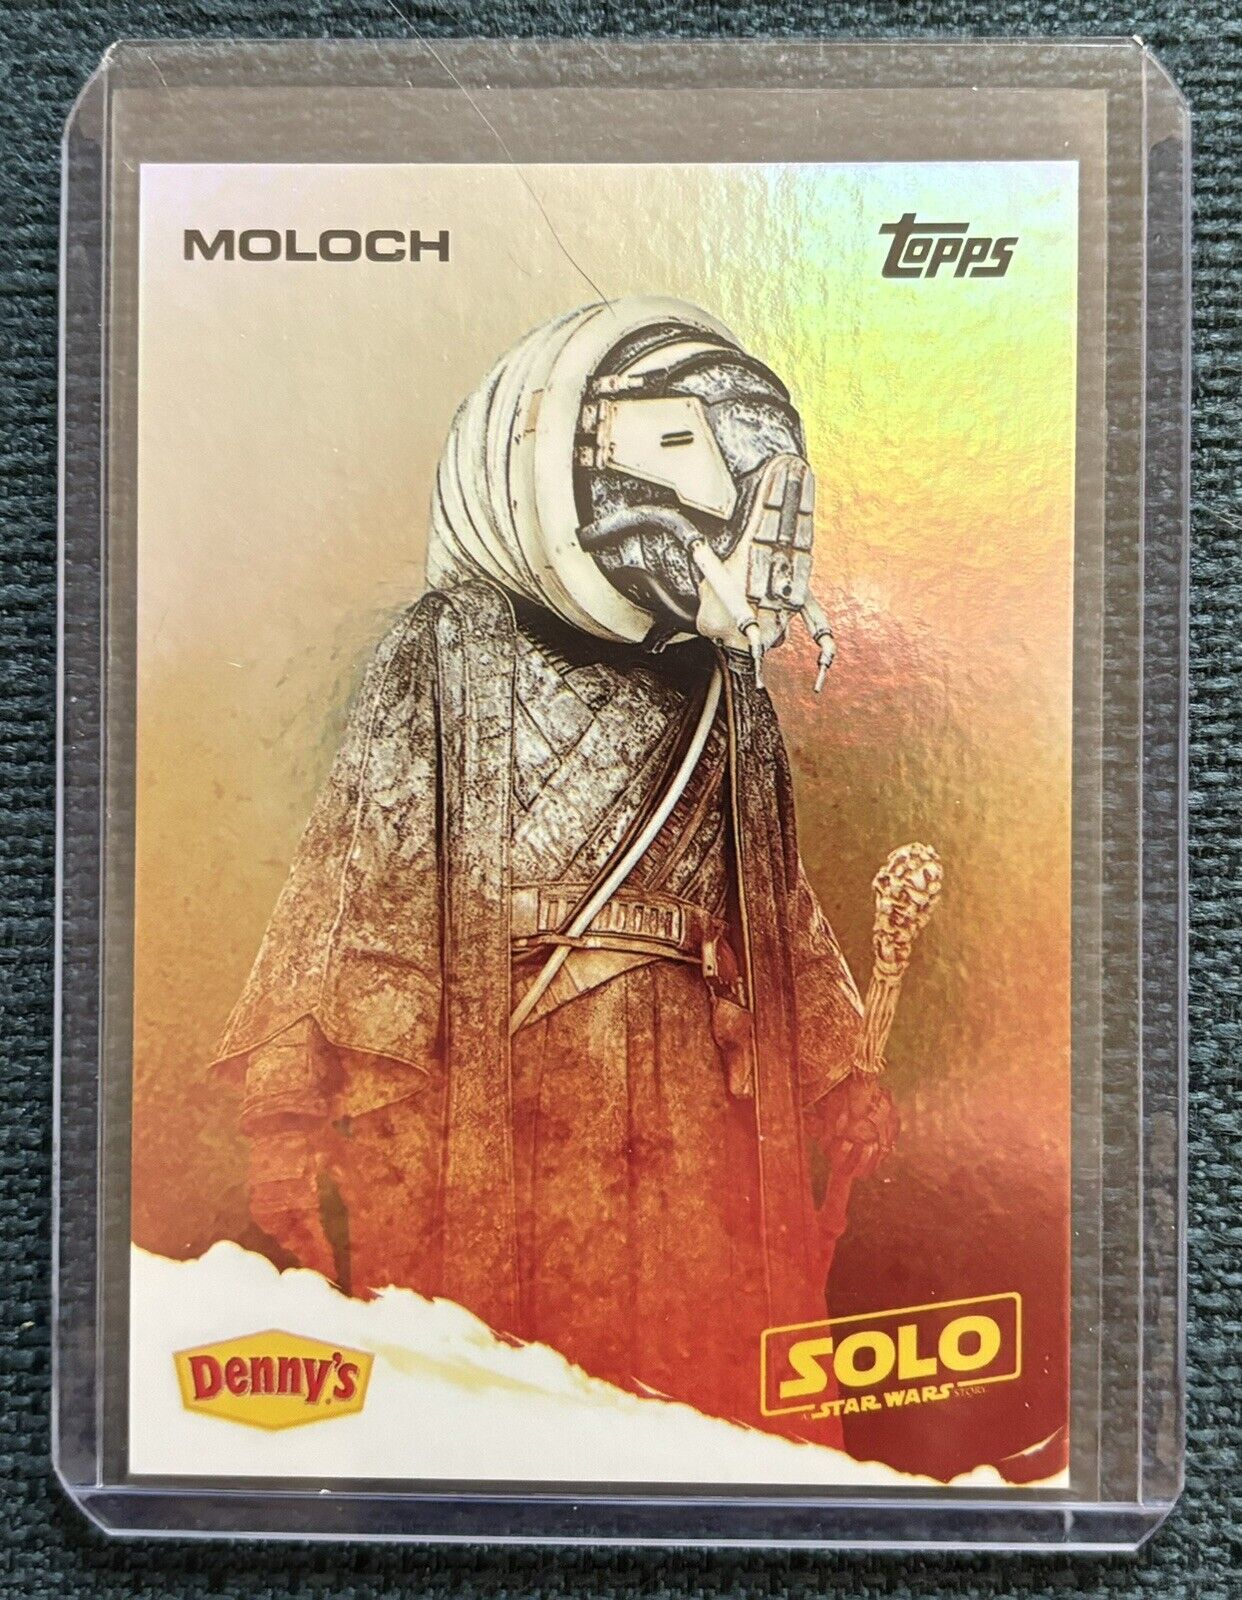 TOPPS SOLO: A STAR WARS STORY MOLOCH 2018 DENNY\'S FOIL CARD 